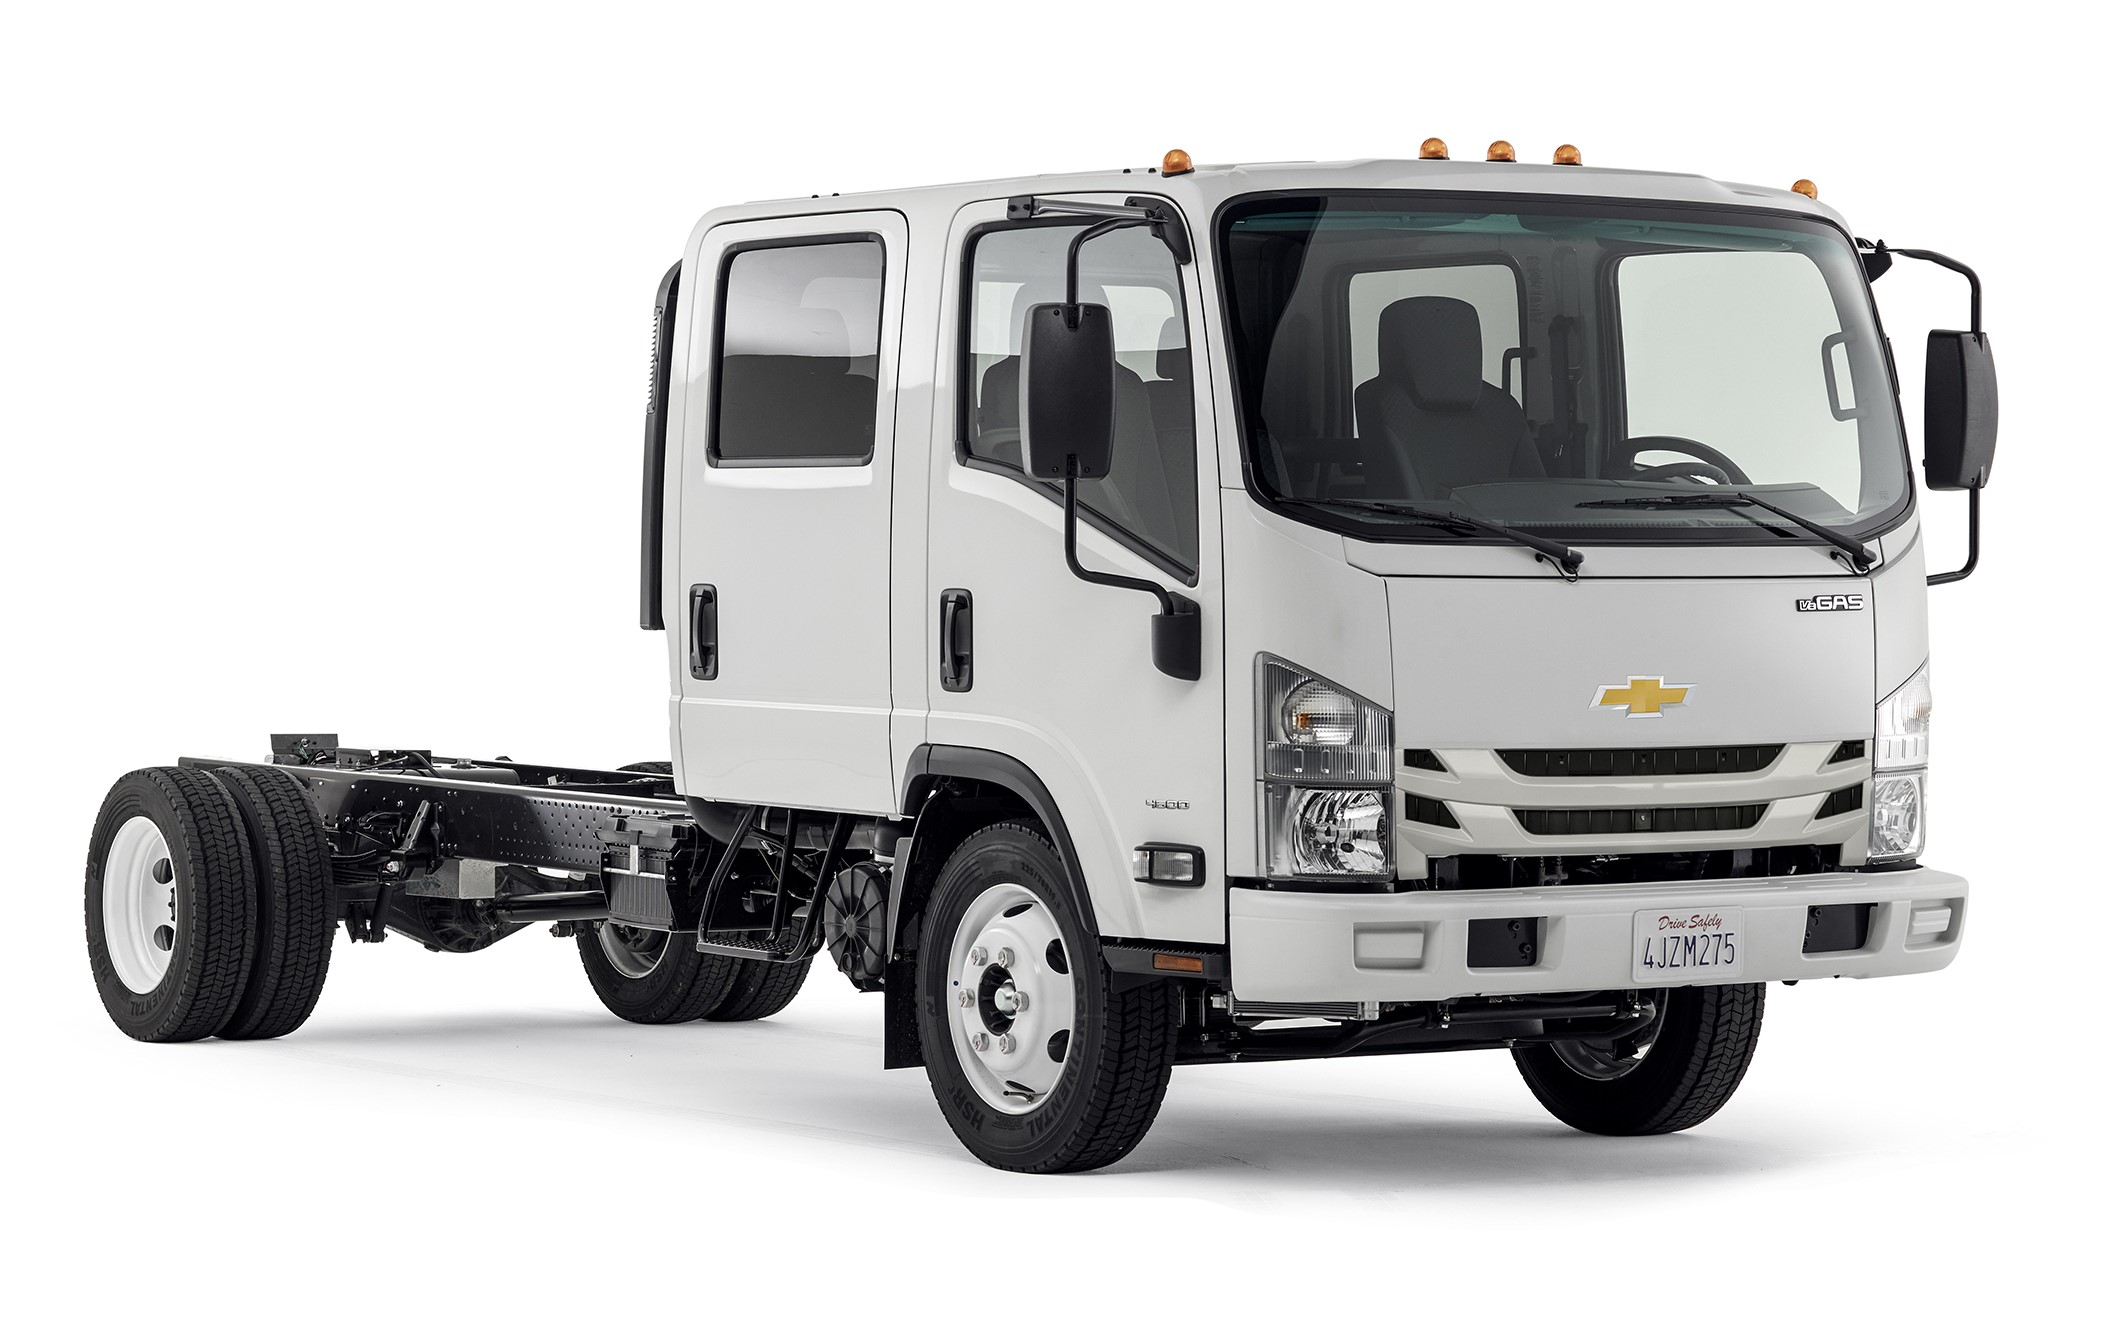 In 2016, Chevrolet will re-enter the low cab forward market with six new models – Chevrolet 3500, 3500HD, 4500, 4500HD, 5500 and 5500 HD.